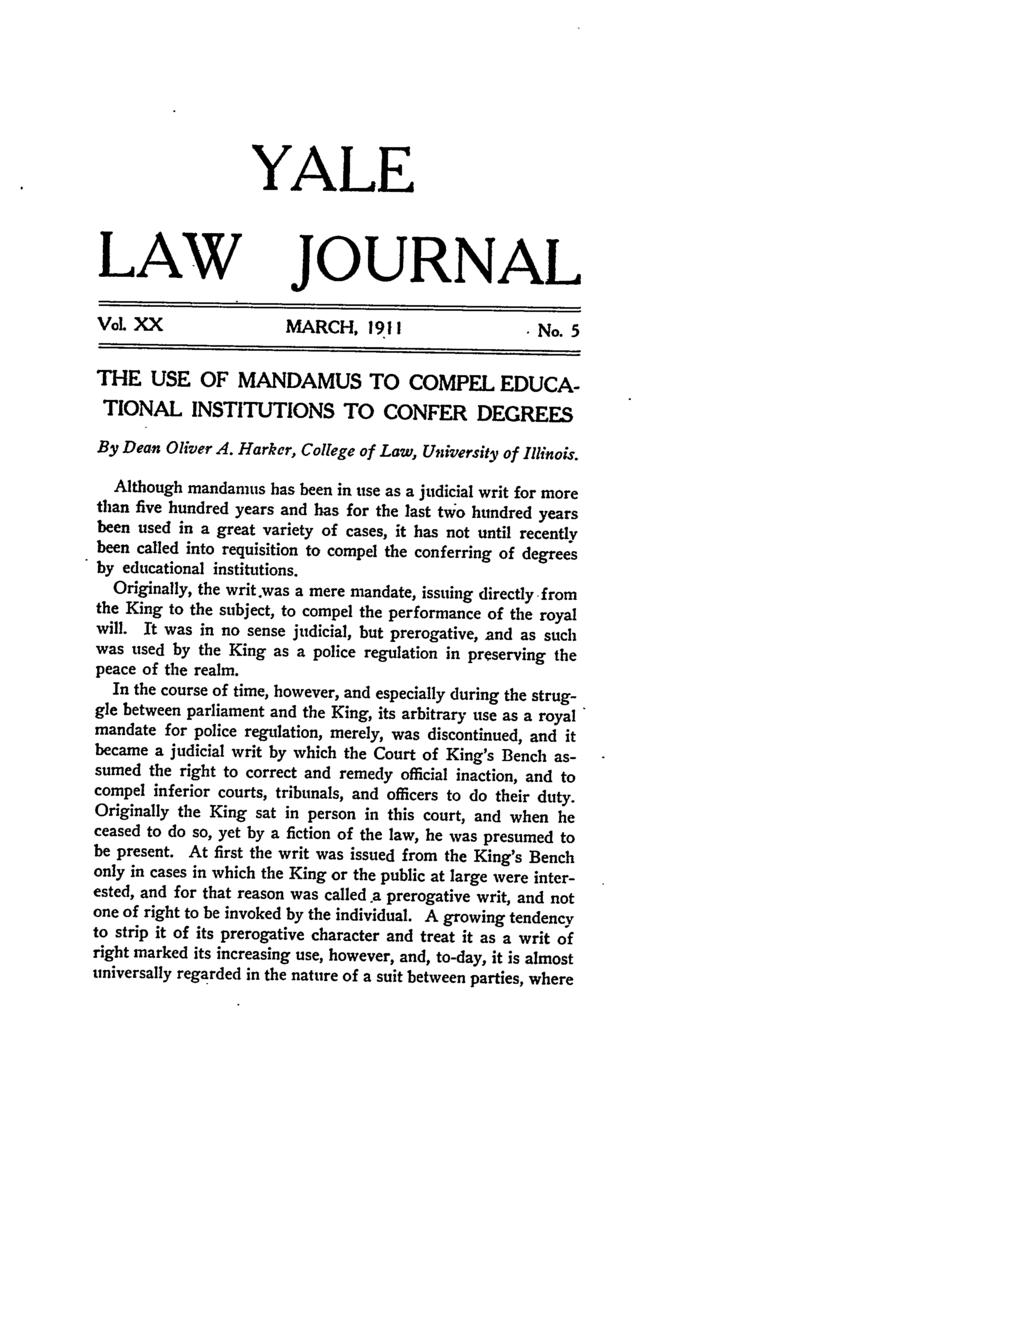 YALE LAW JOURNAL VoL XX MARCH, 1911 No. 5 THE USE OF MANDAMUS TO COMPEL EDUCA- TIONAL INSTITUTIONS TO CONFER DEGREES By Dean Oliver A. Harker, College of Law, University of Illinois.